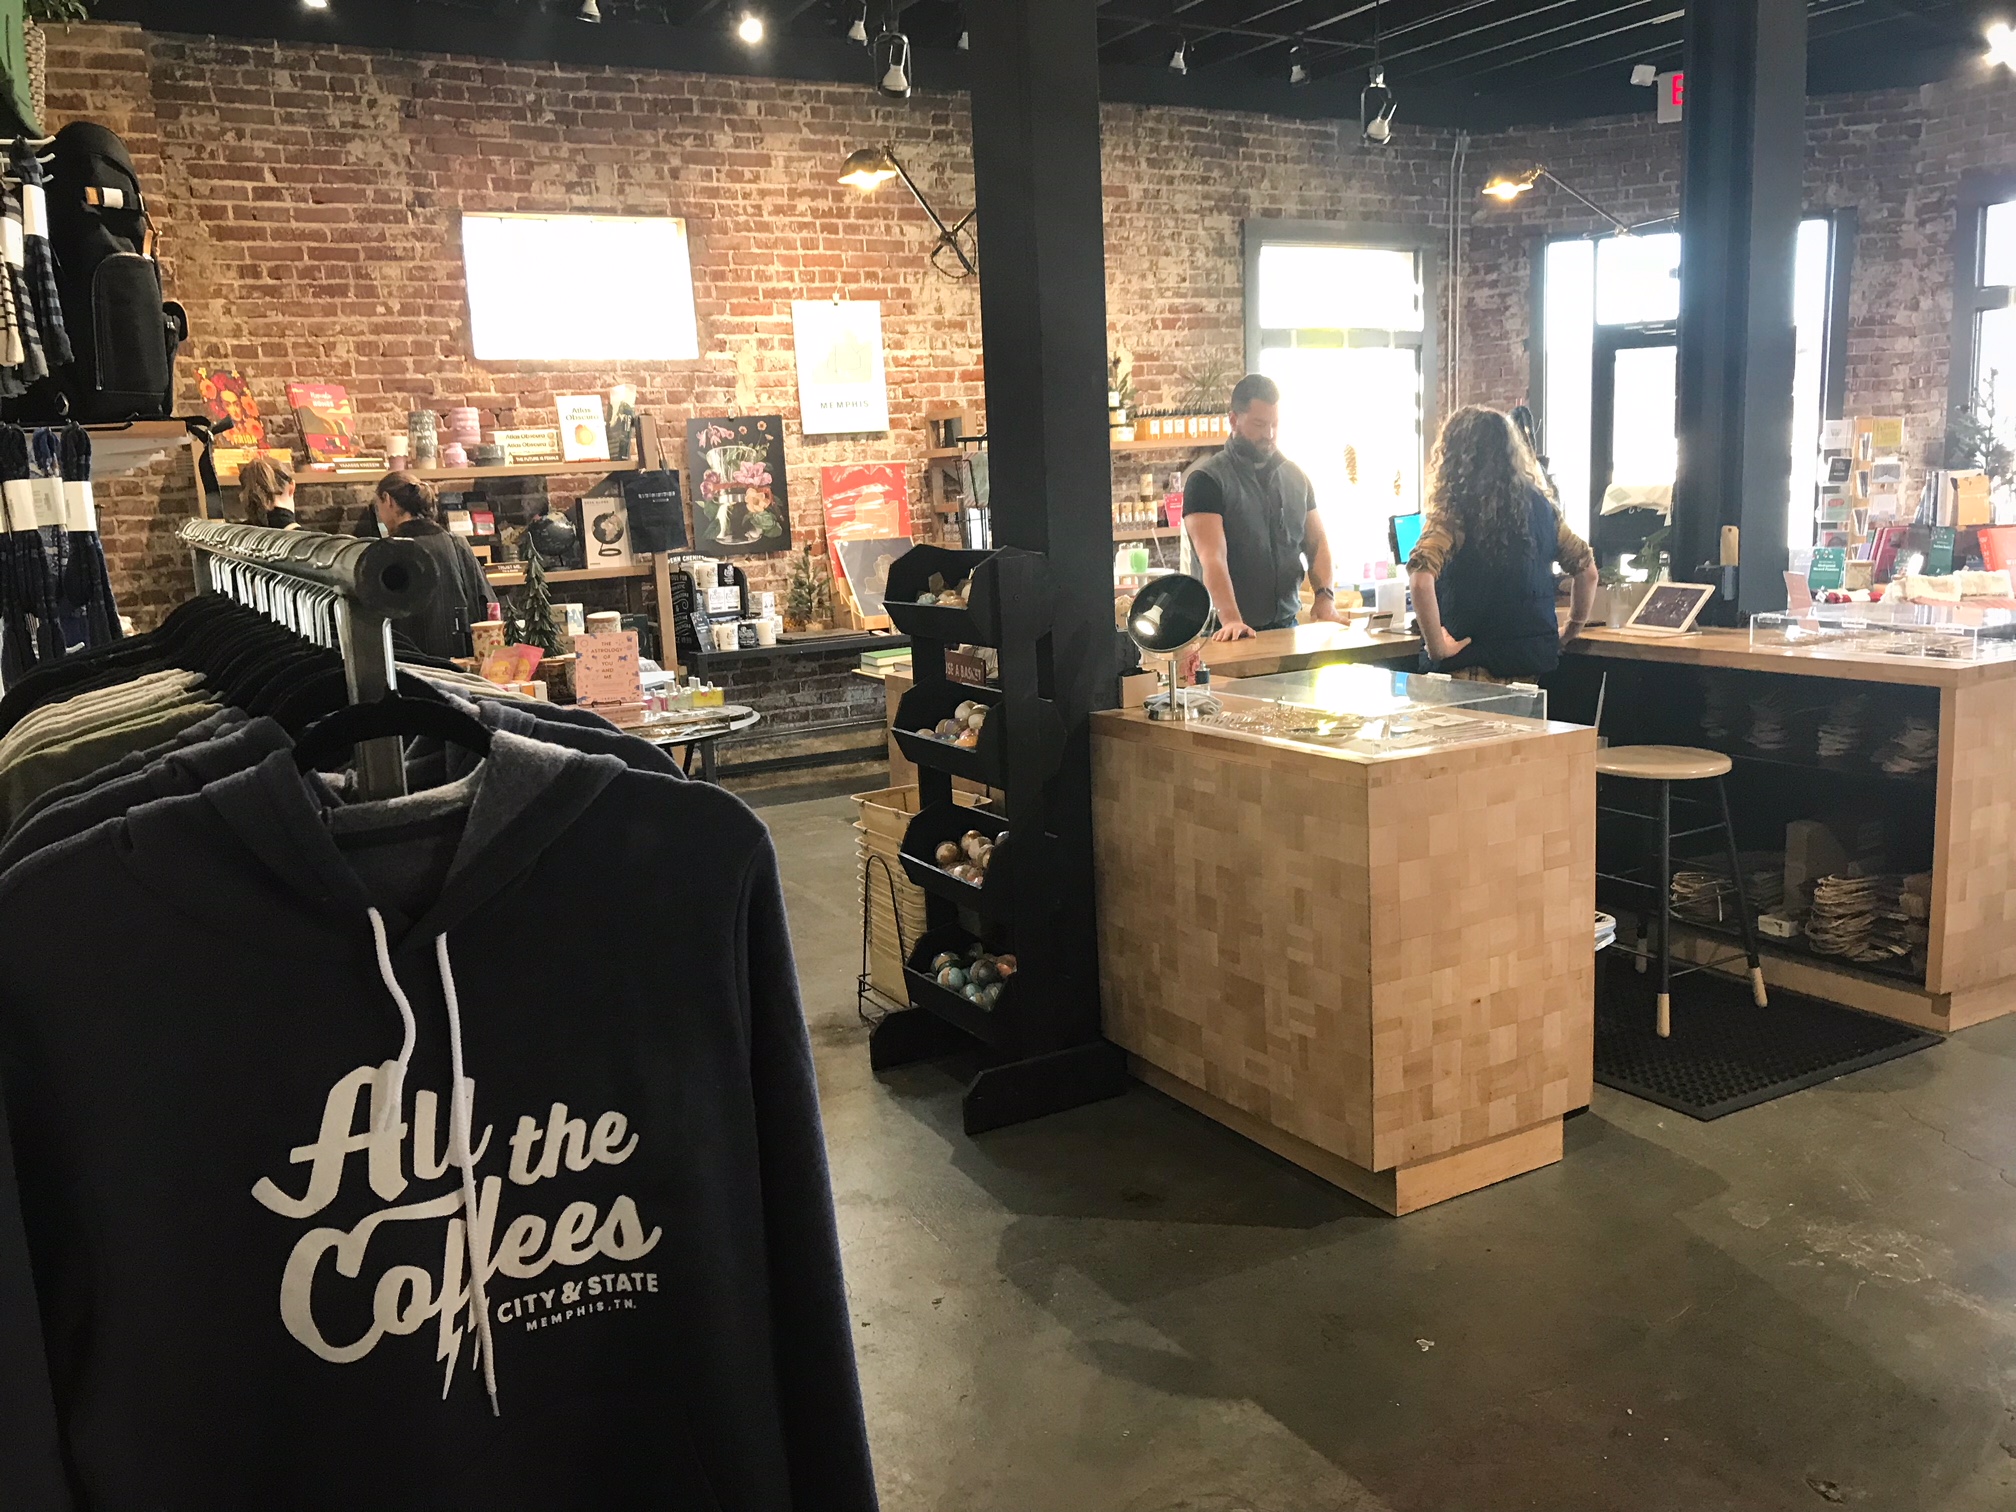 The retail side of City & State accounts for roughly 40 percent of sales and is curated with makers from around the country. (Cole Bradley)